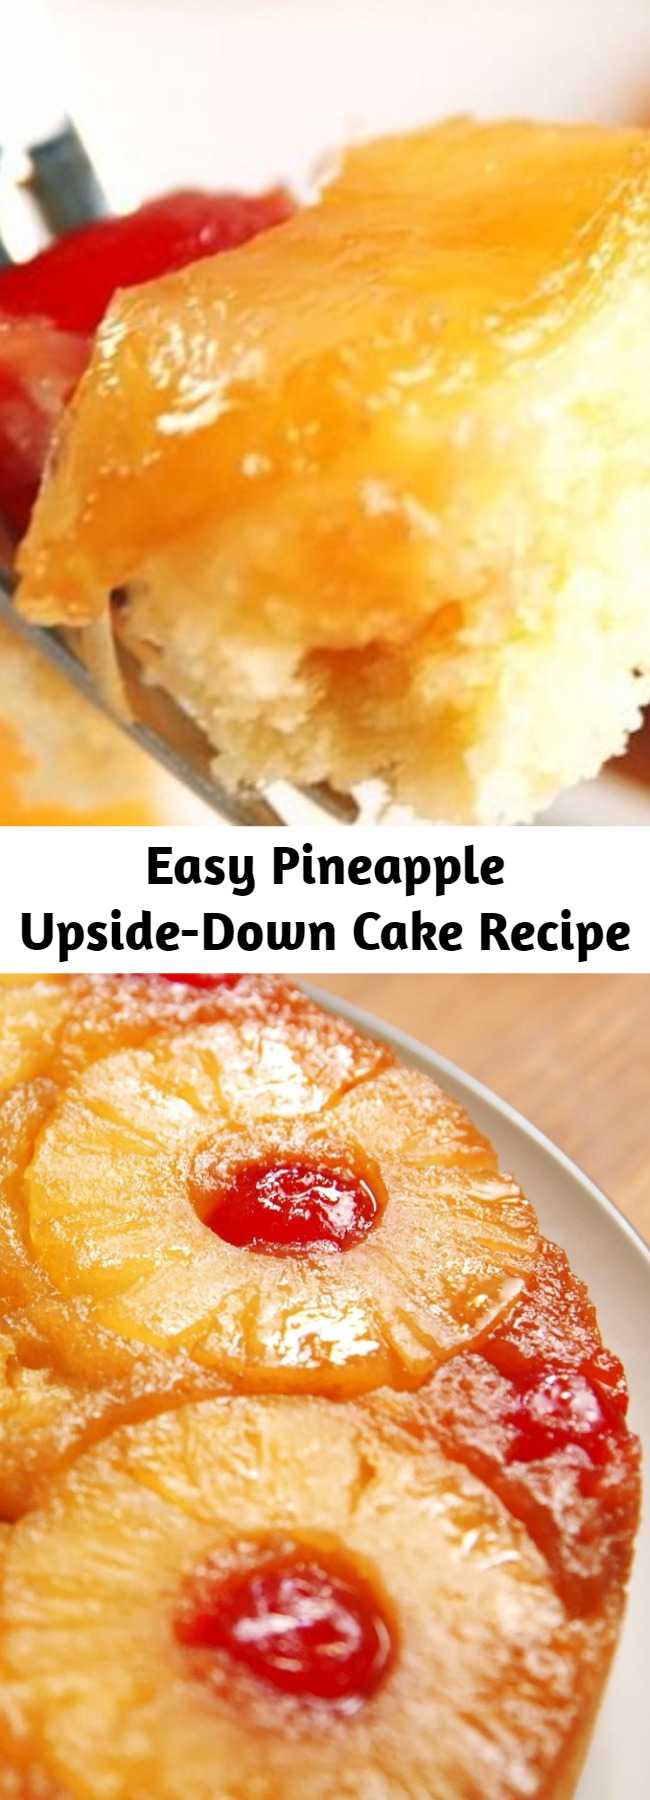 Easy Pineapple Upside-Down Cake Recipe - This pineapple upside-down cake will remind you why it's a classic.